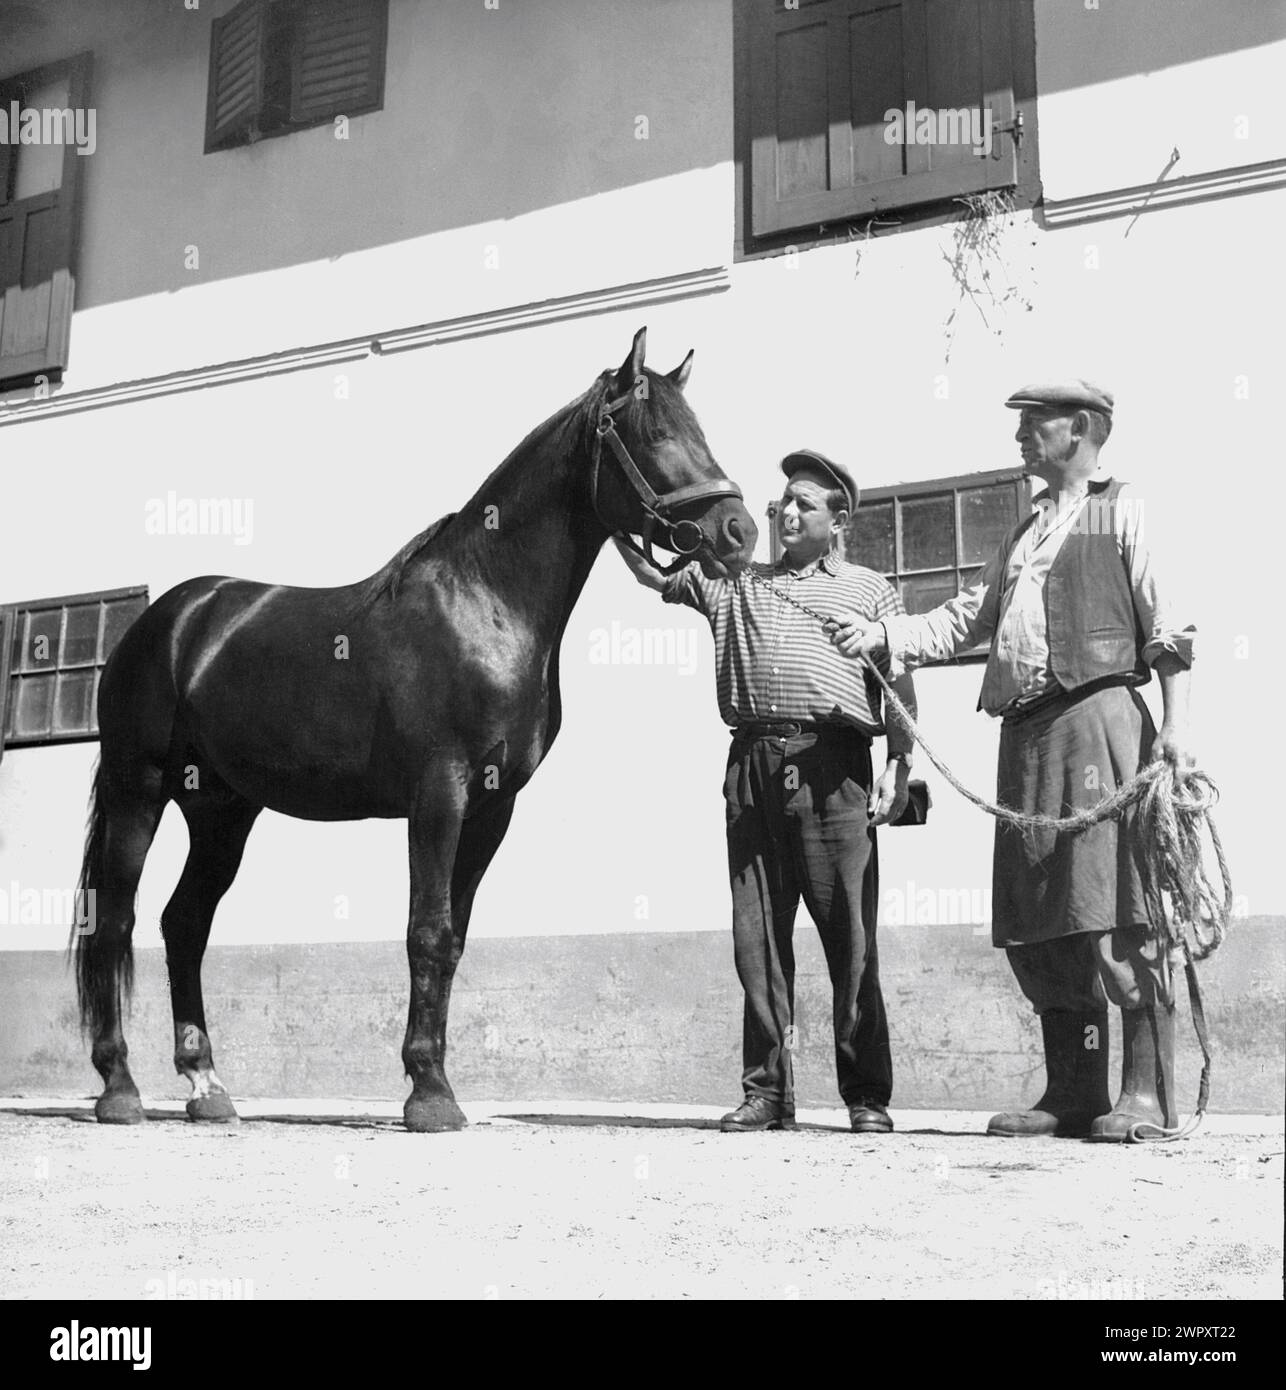 State agricultural cooperative in communist Romania, in the 1970s. Workers at a state-run equestrian facility. Stock Photo